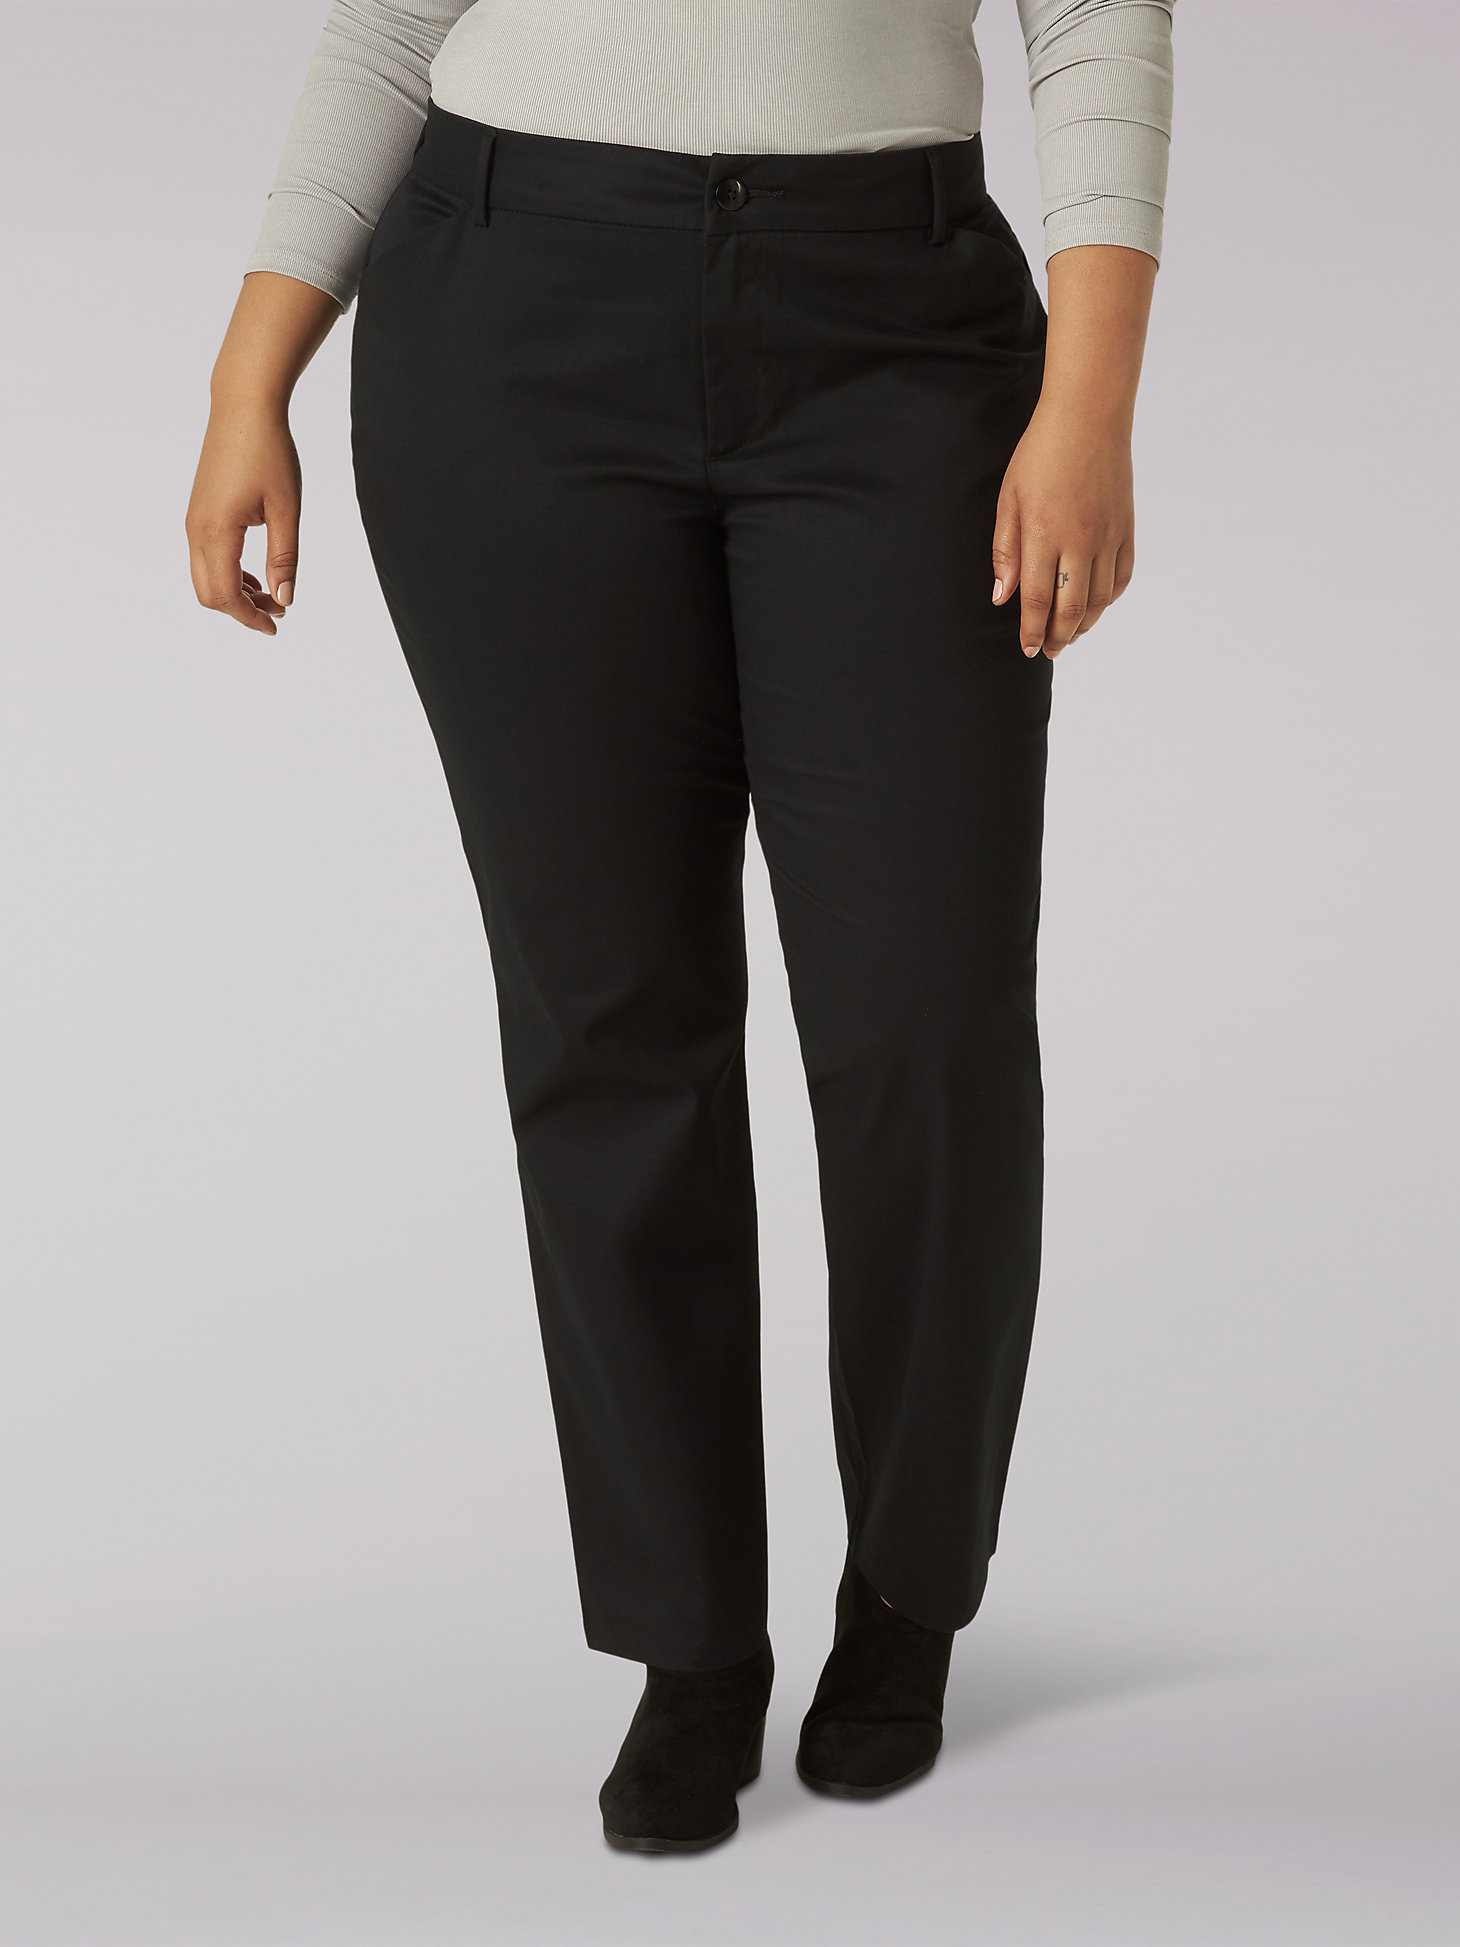 Women's Wrinkle Free Relaxed Fit Straight Leg Pant (Plus) in Black main view